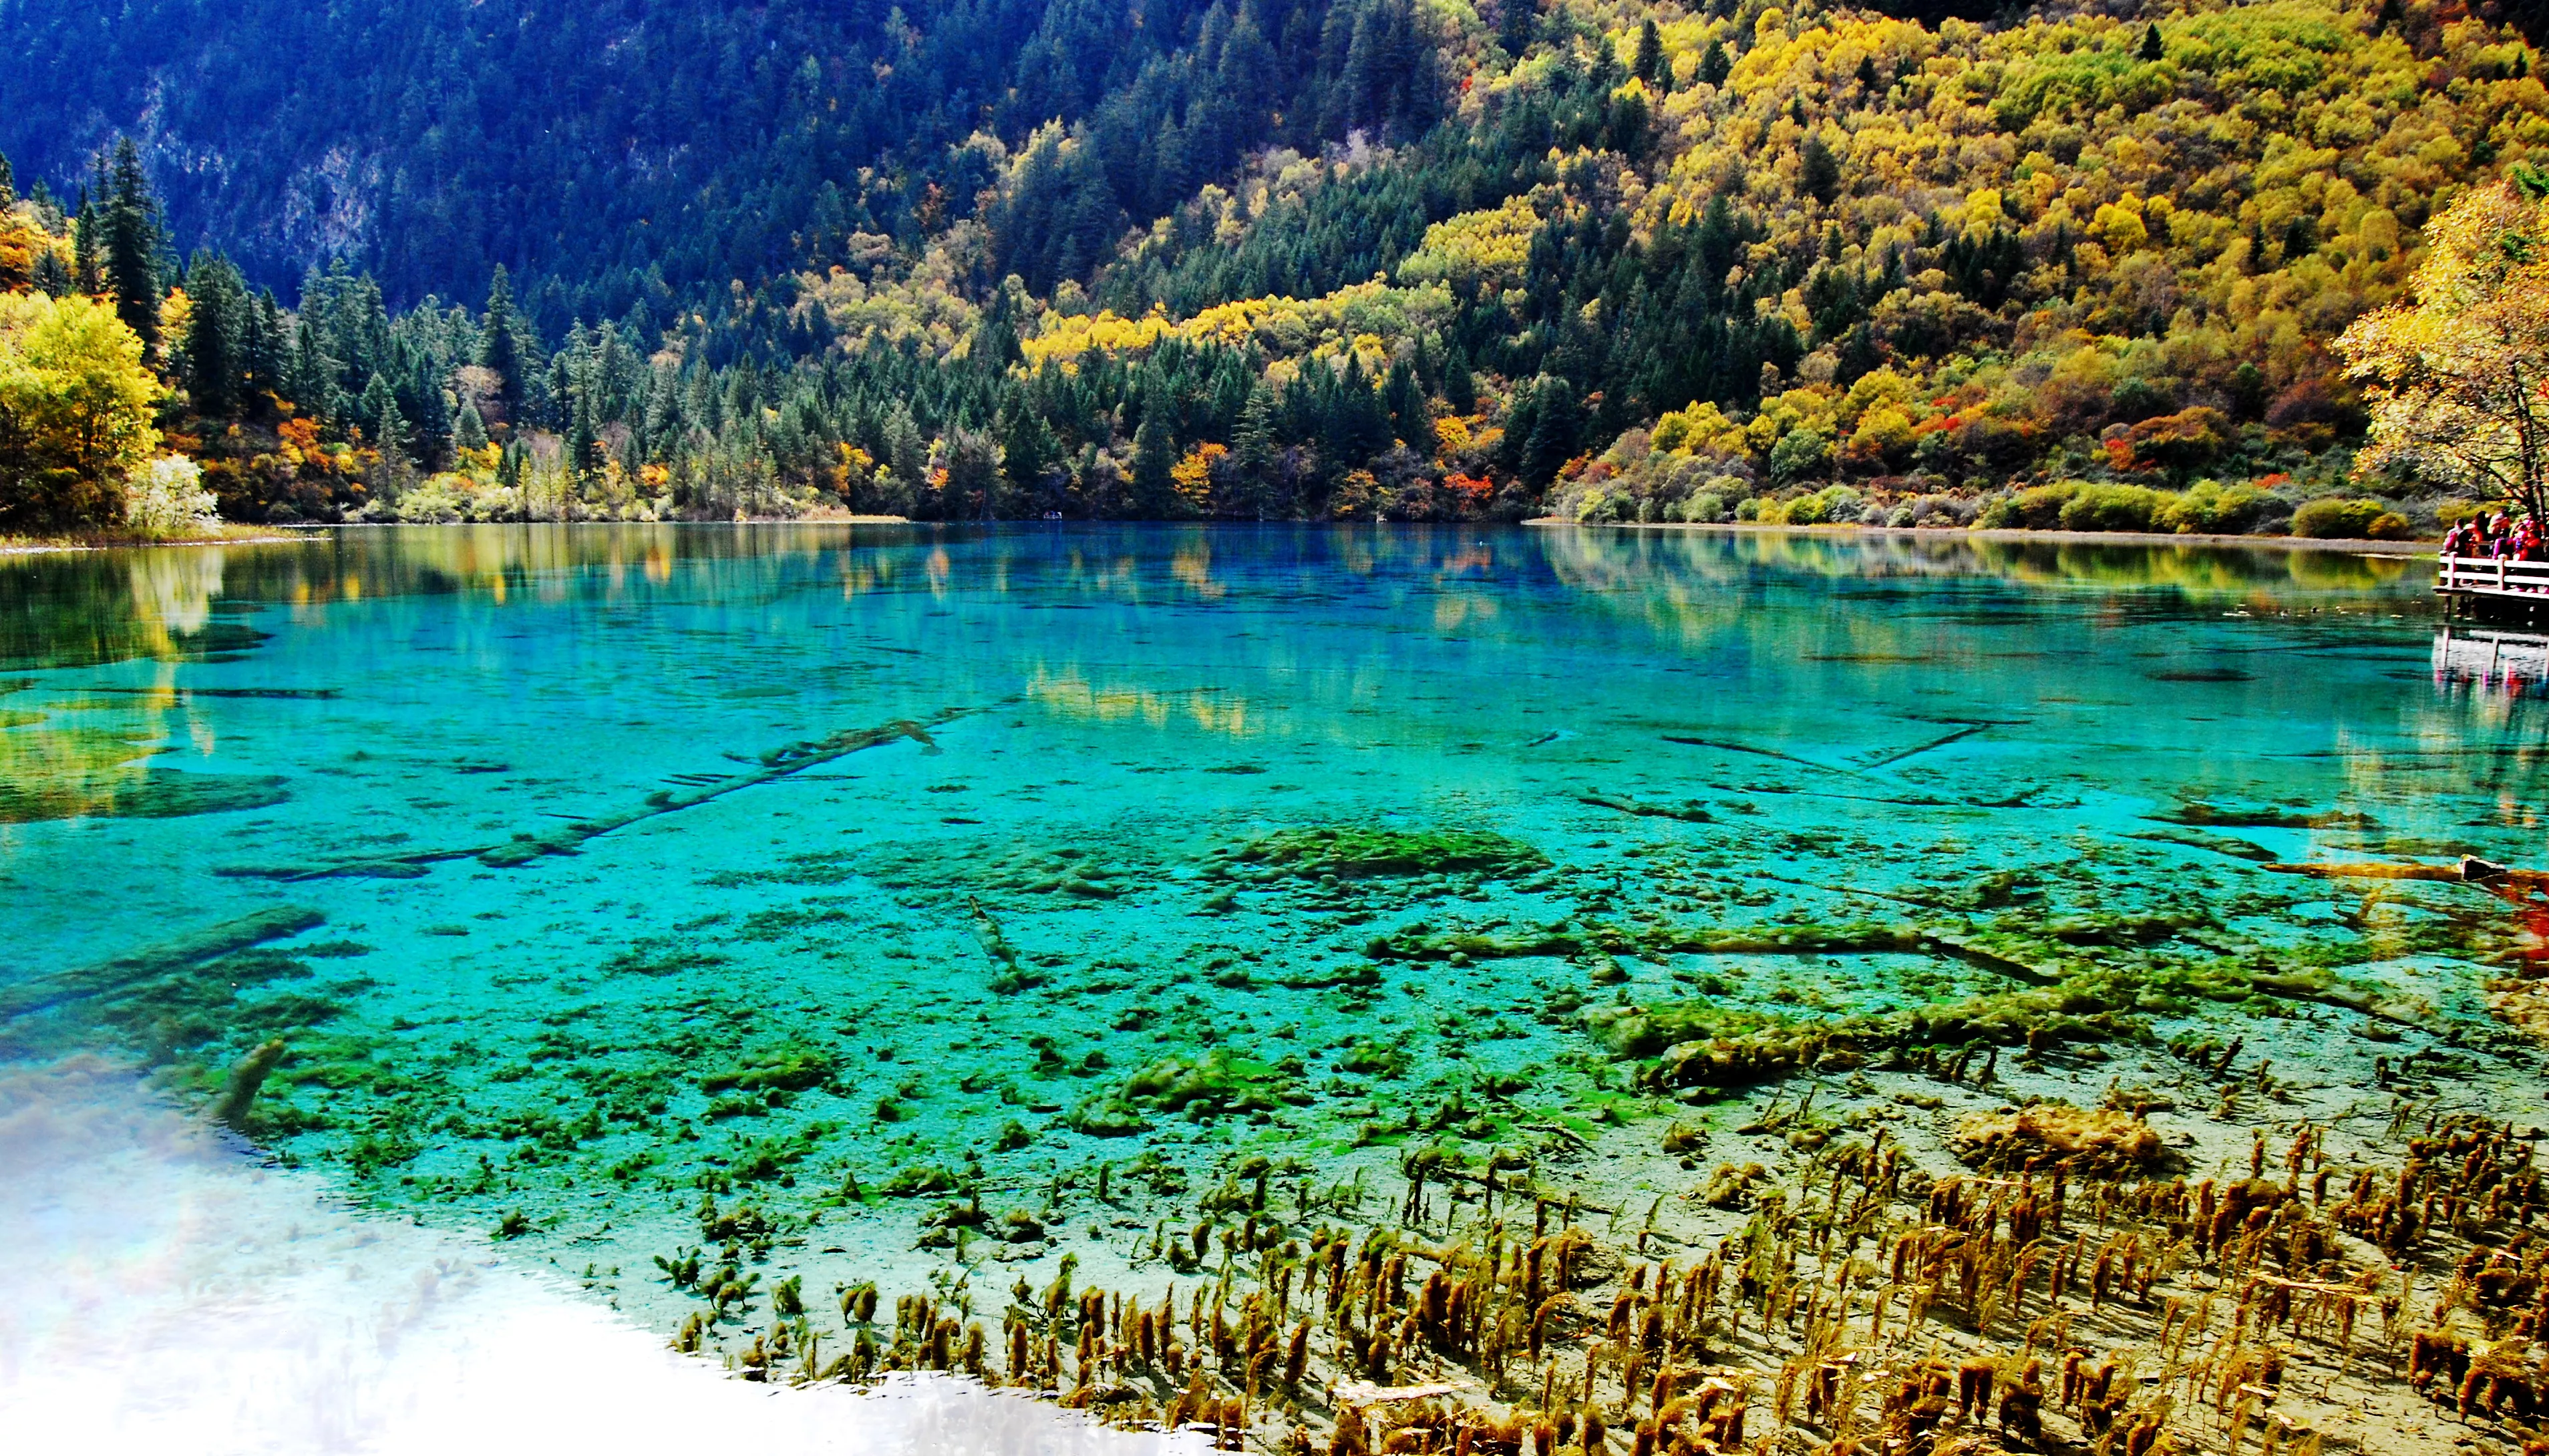 Jiuzhaigou in China, East Asia | Parks - Rated 3.7